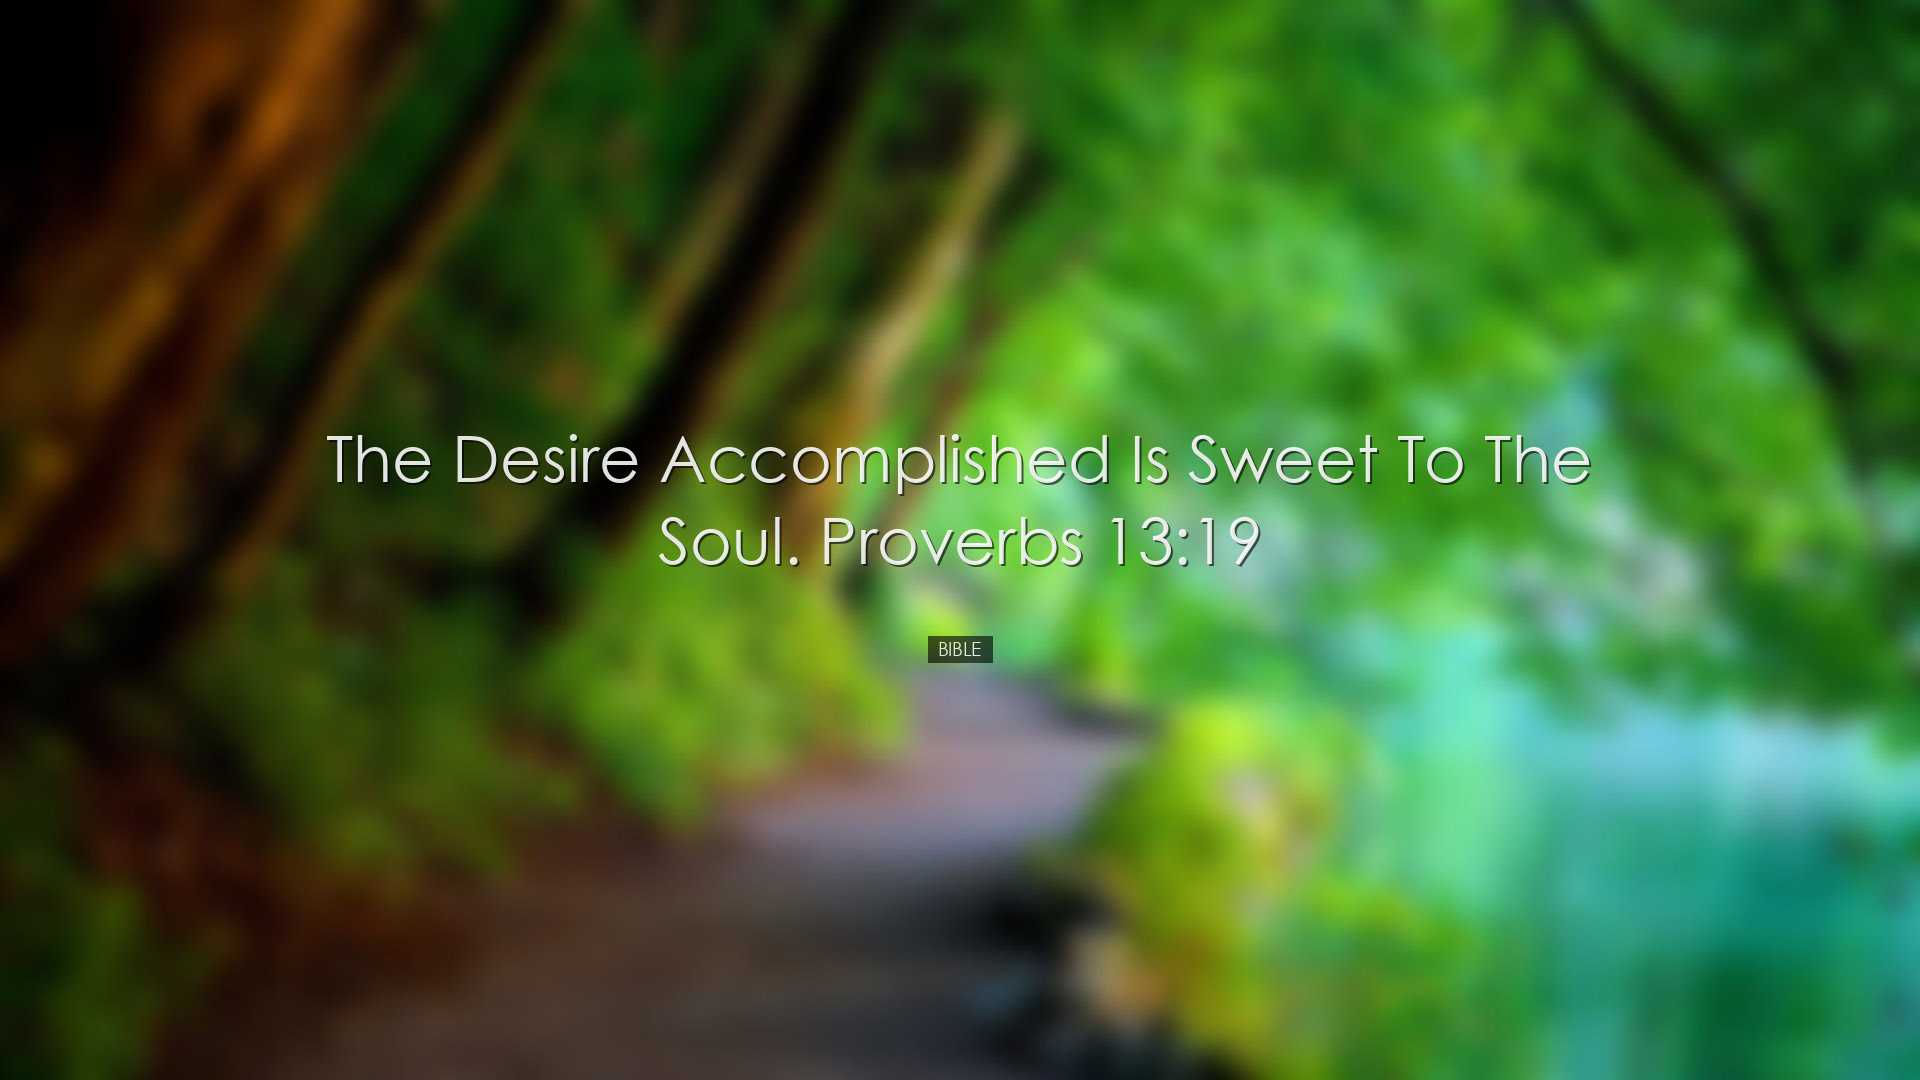 The desire accomplished is sweet to the soul. Proverbs 13:19 - Bib